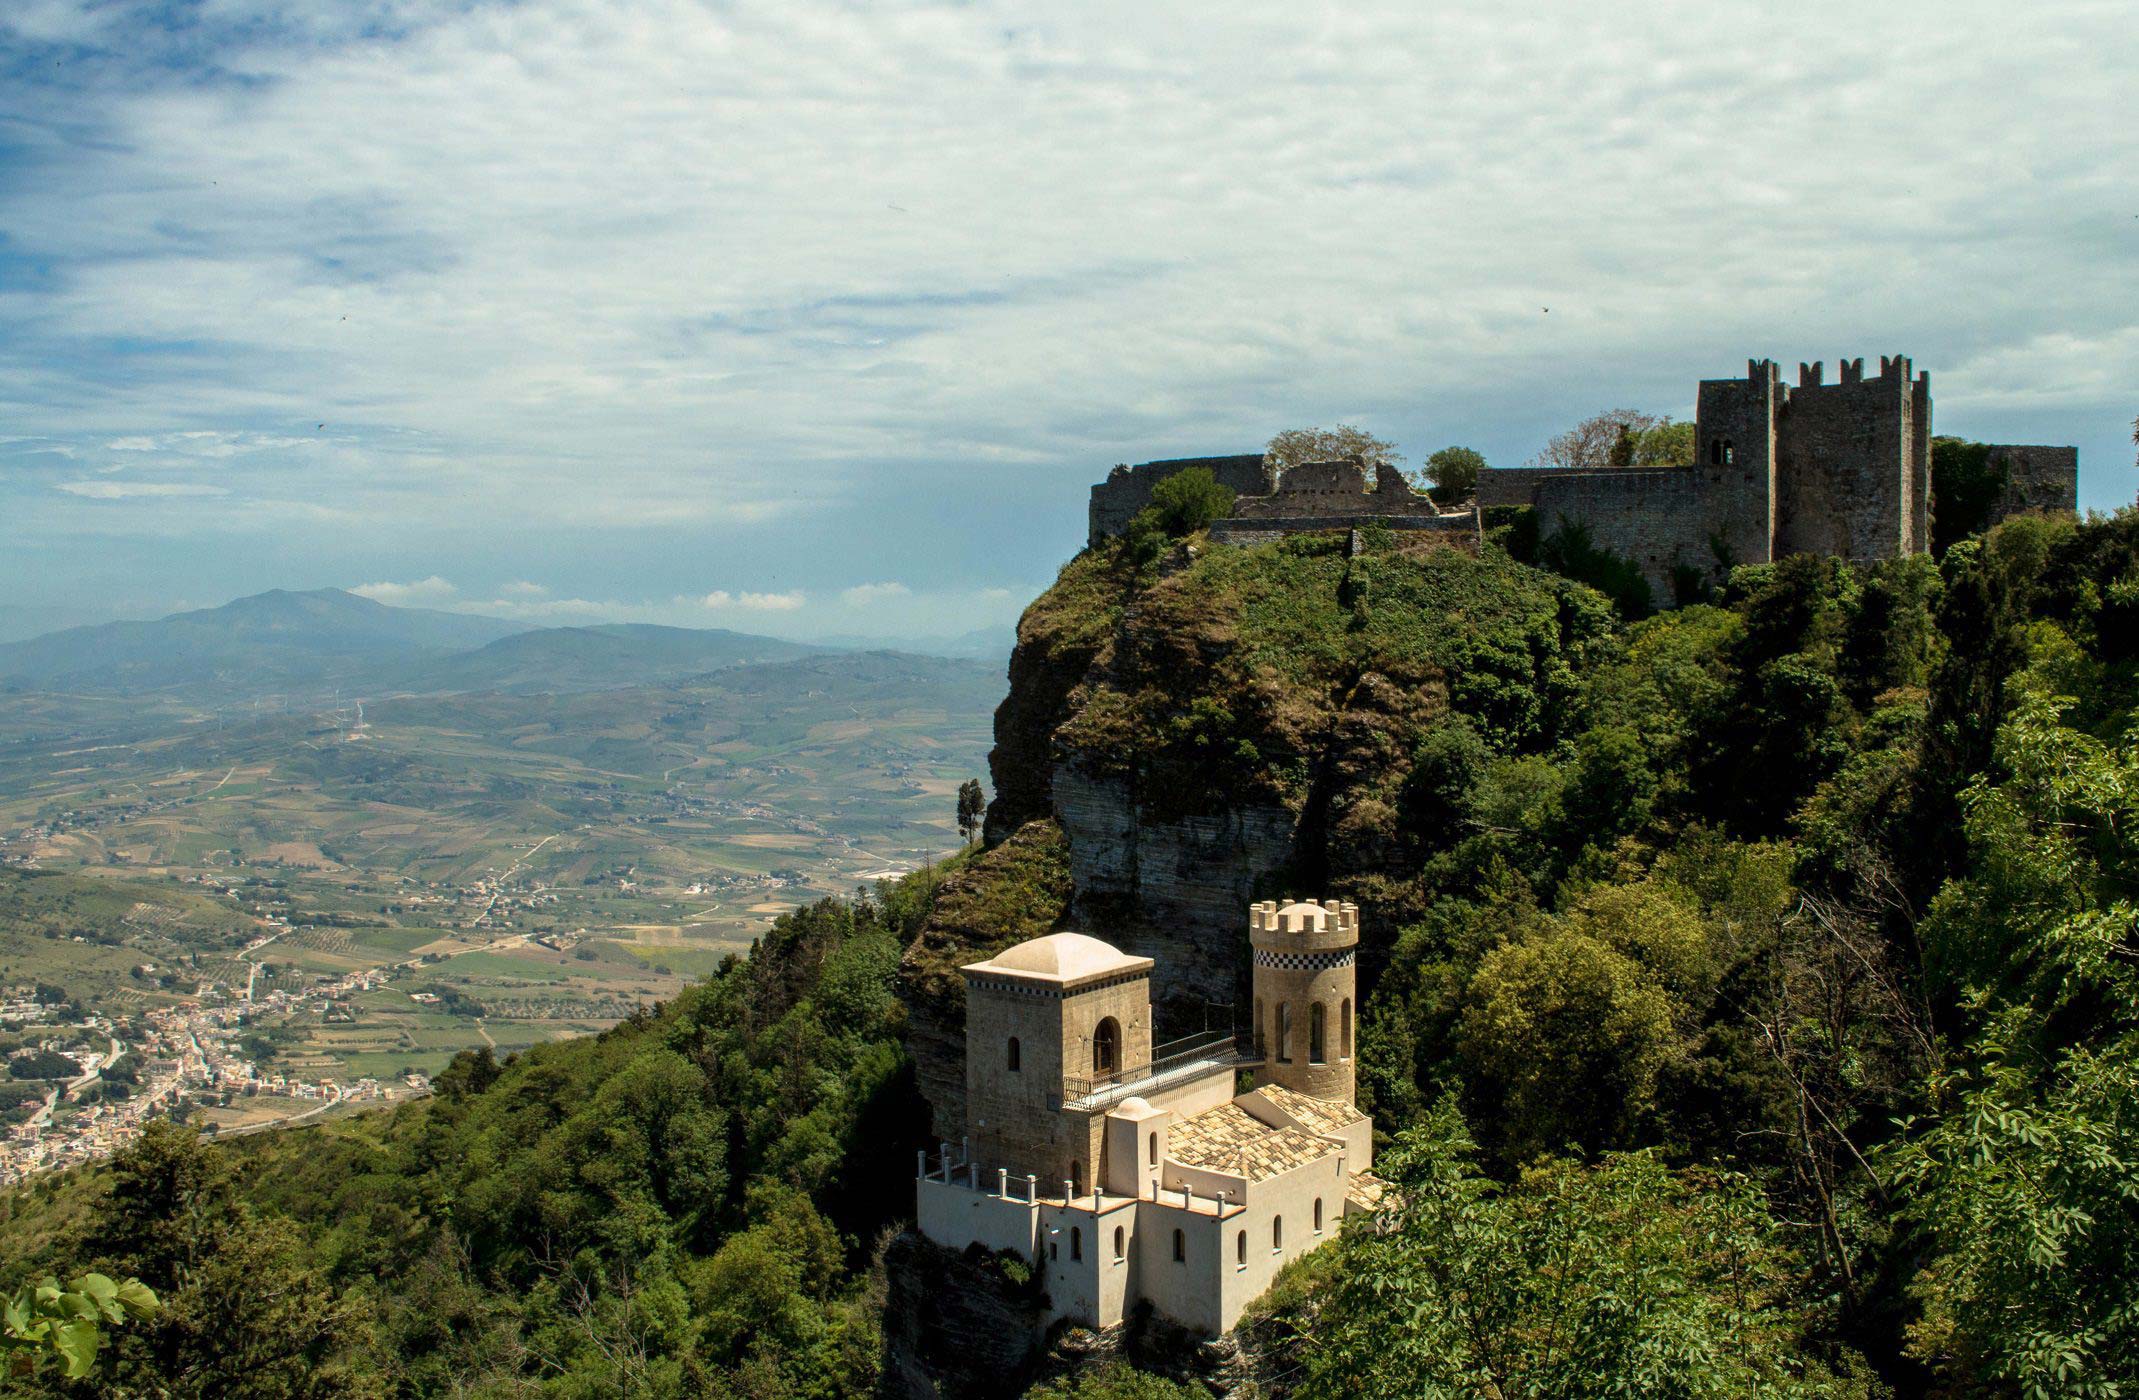 A view of the beauiful Venere Castle in Erice, Sicily, Italy